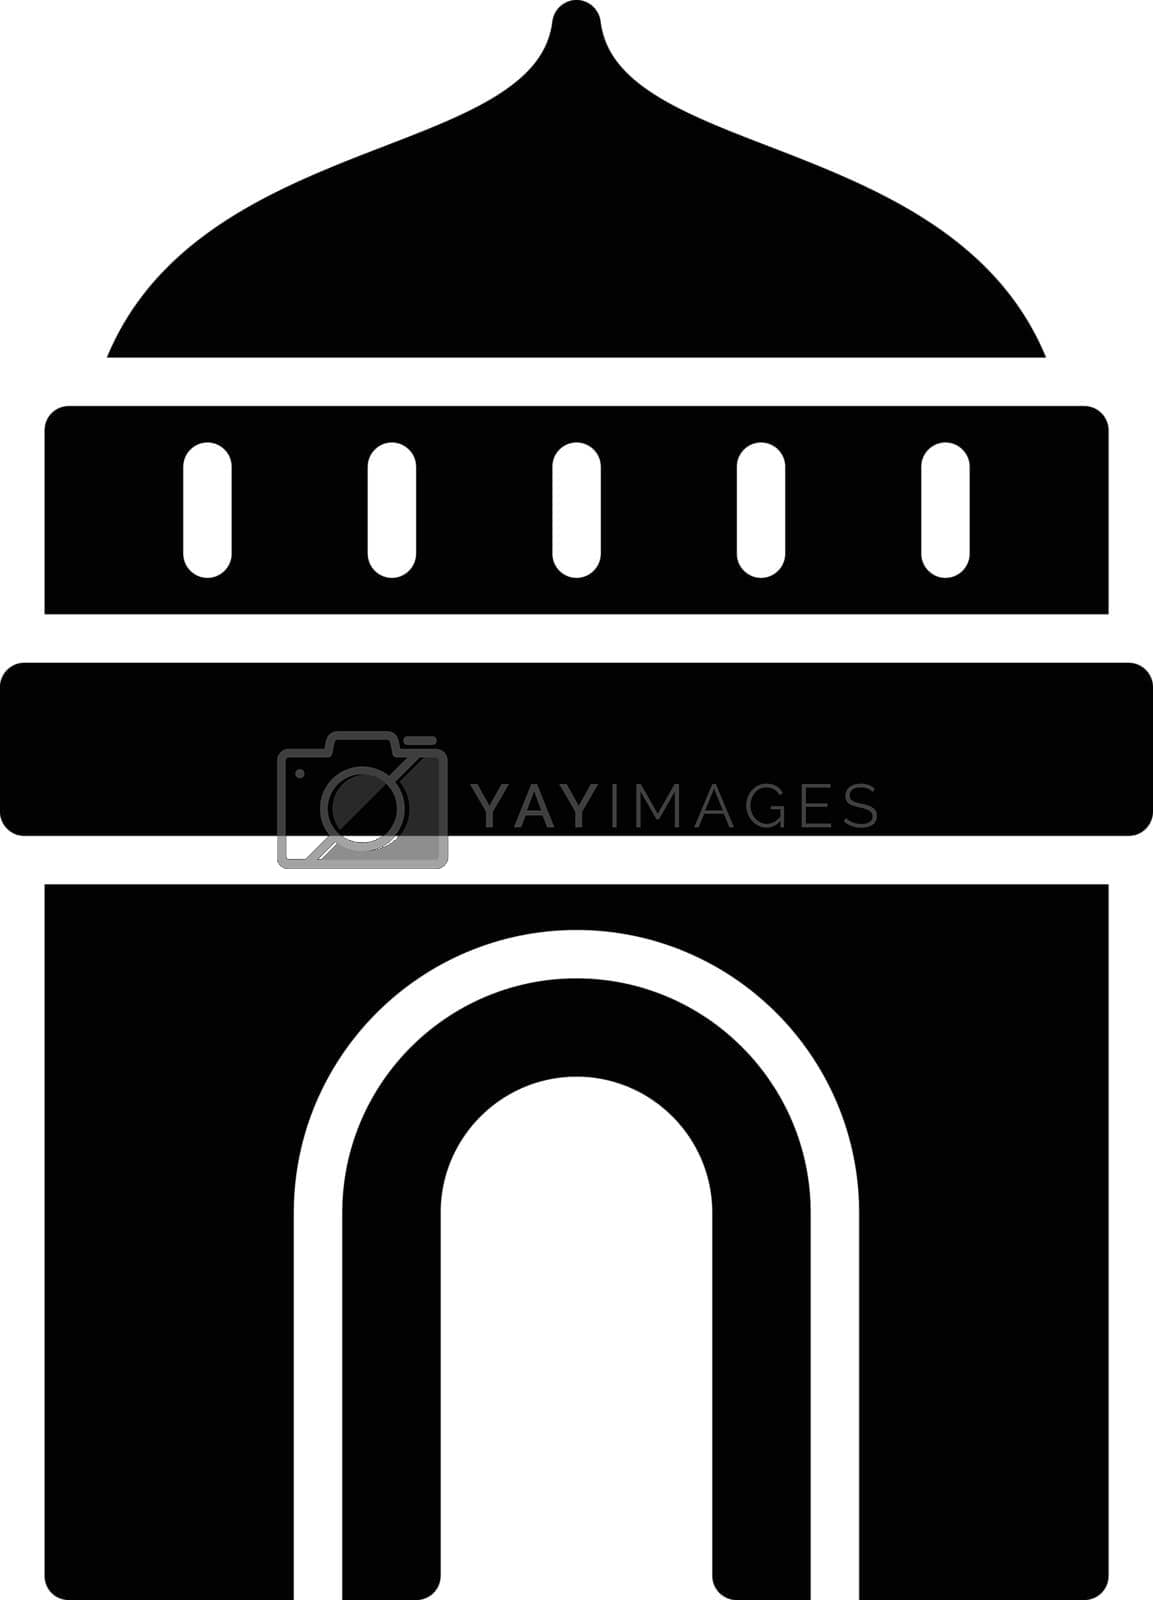 Royalty free image of famous by FlaticonsDesign